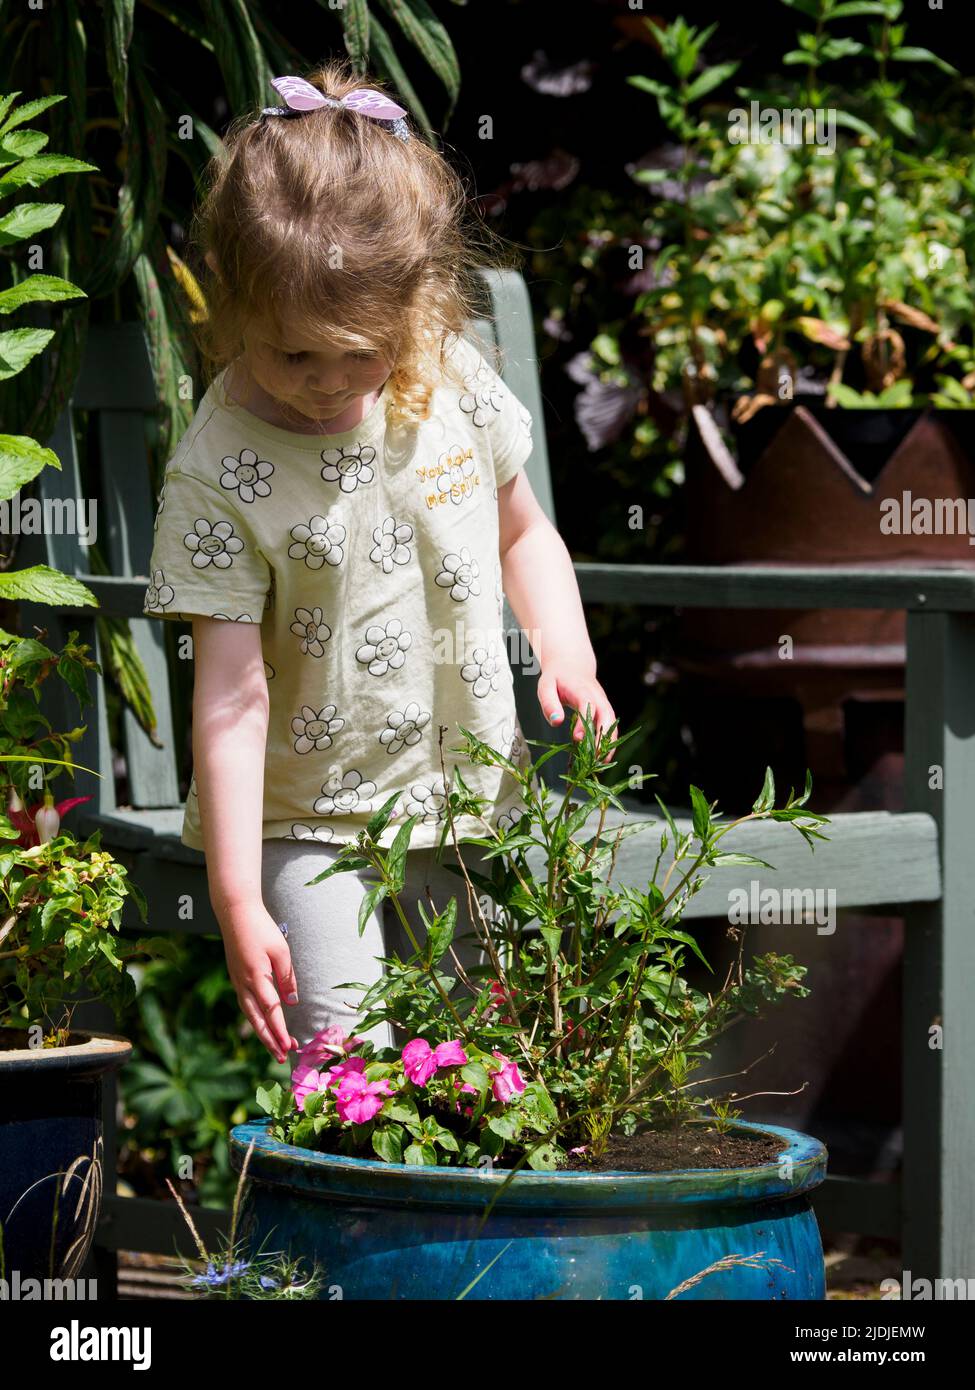 Young girl looking at the flowers in a garden, UK Stock Photo